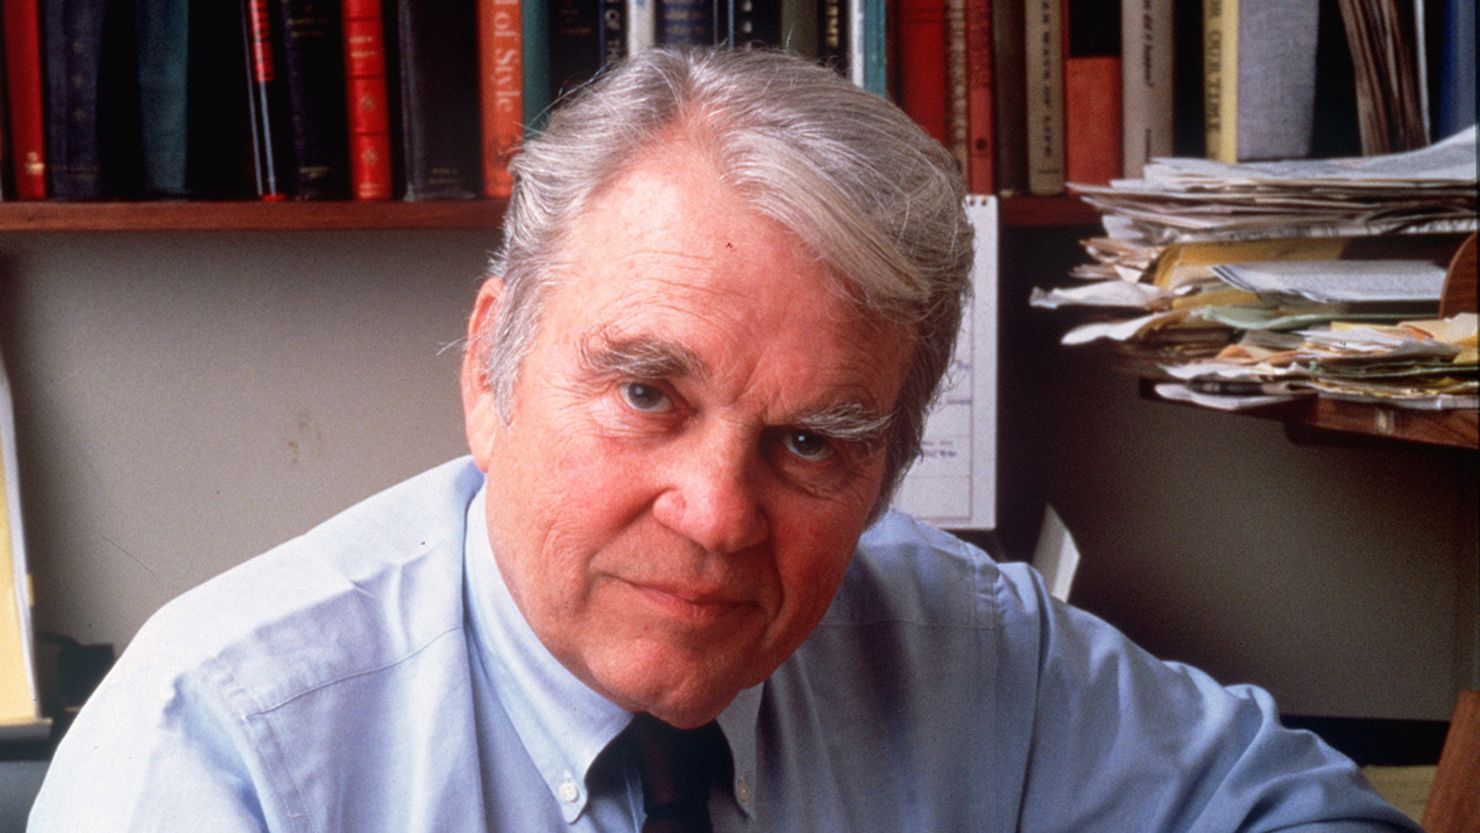 CBS News released this photo of Andy Rooney on the announcement of his death Saturday.